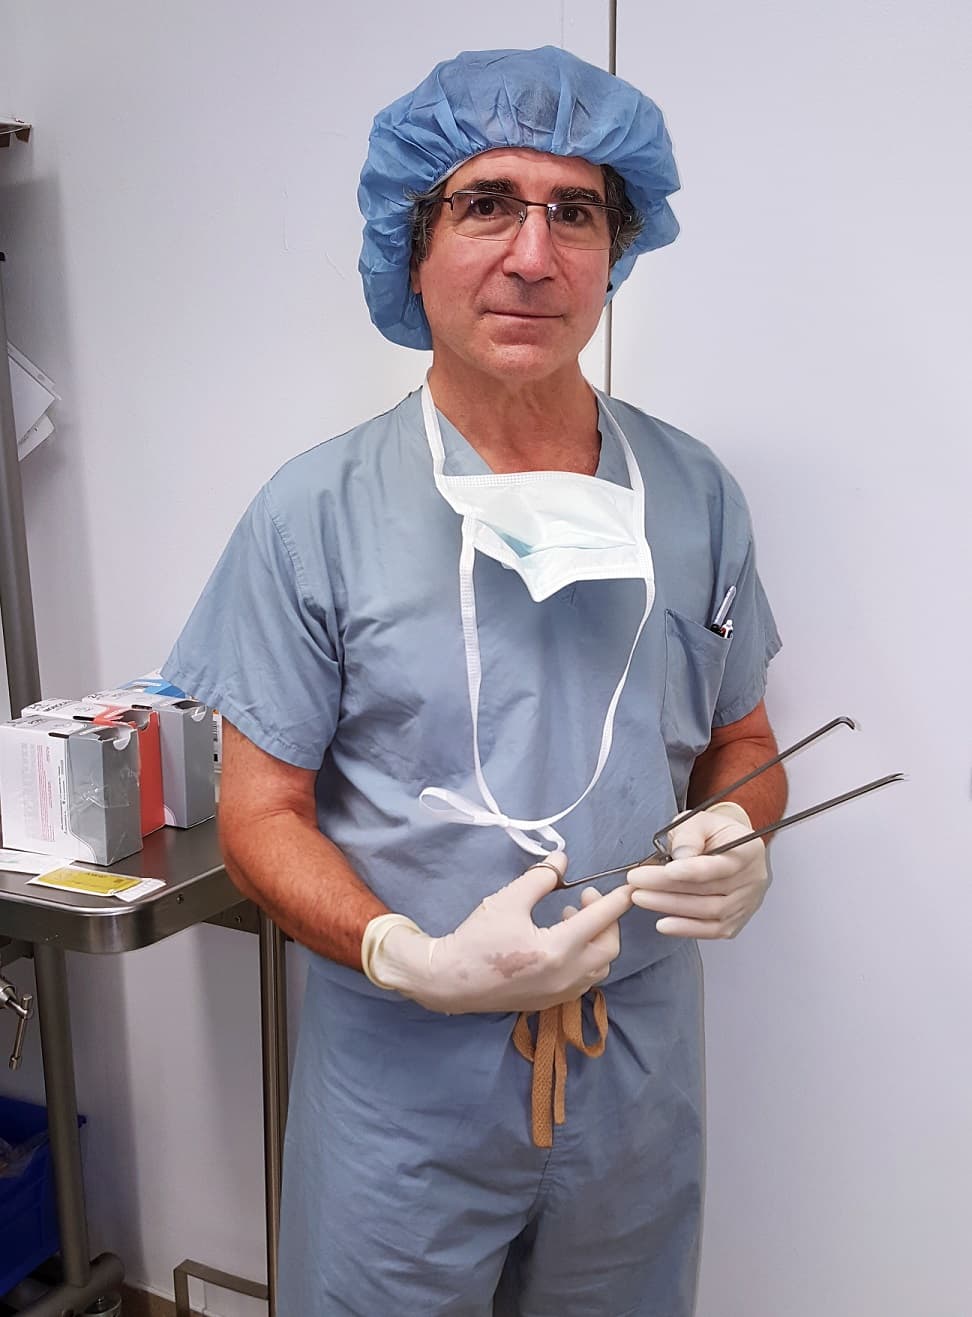 Dr. Deane with the ASSI Deane Body Contouring Forceps